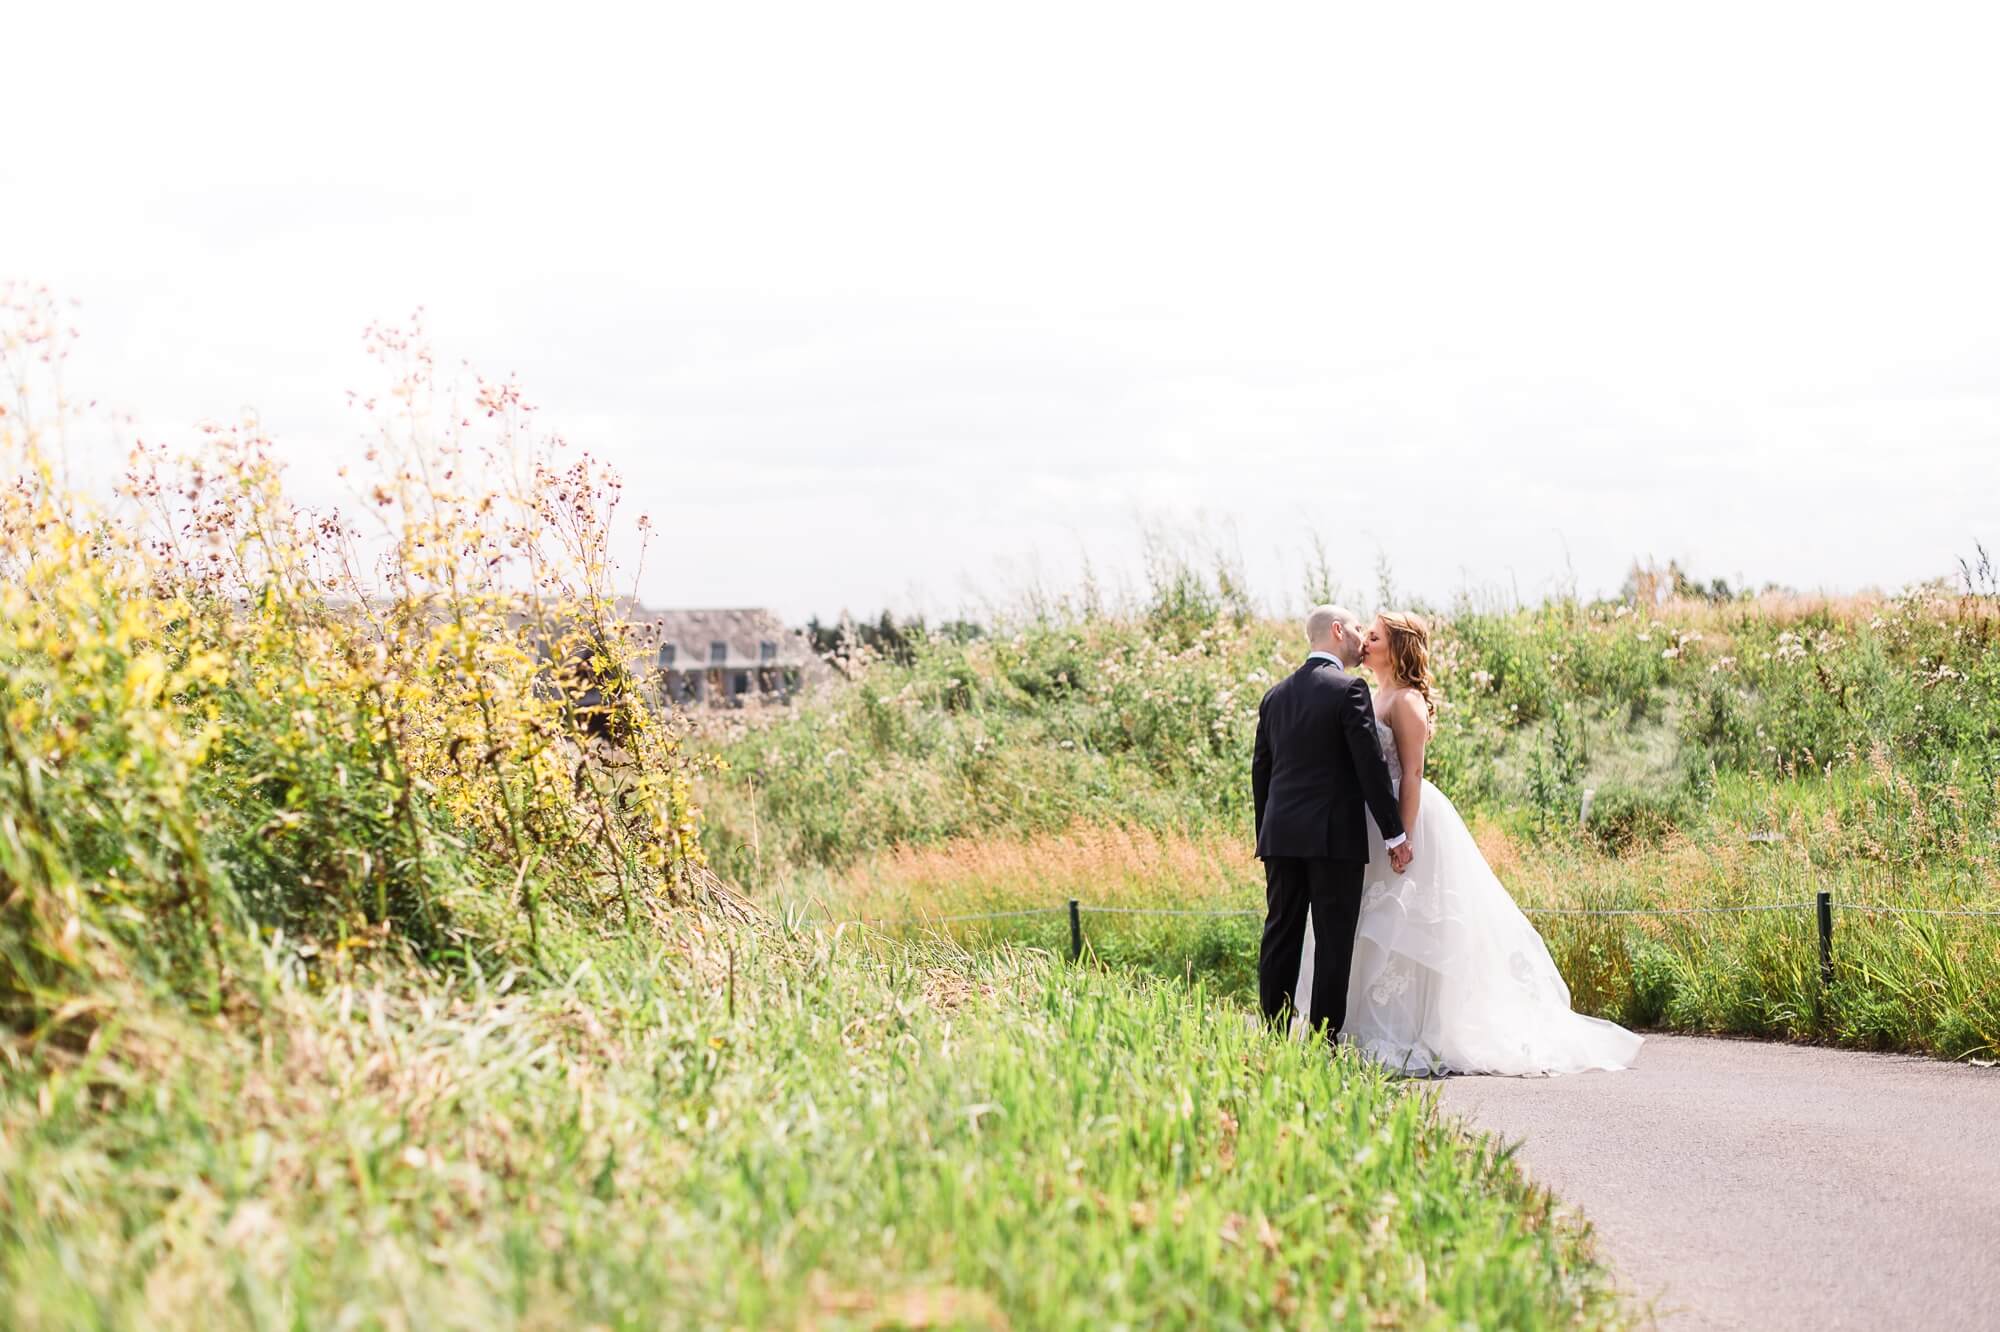 Toronto Wedding at Eagles Nest. Bride and groom kissing down a path surrounded by a beautiful overgrown green field.